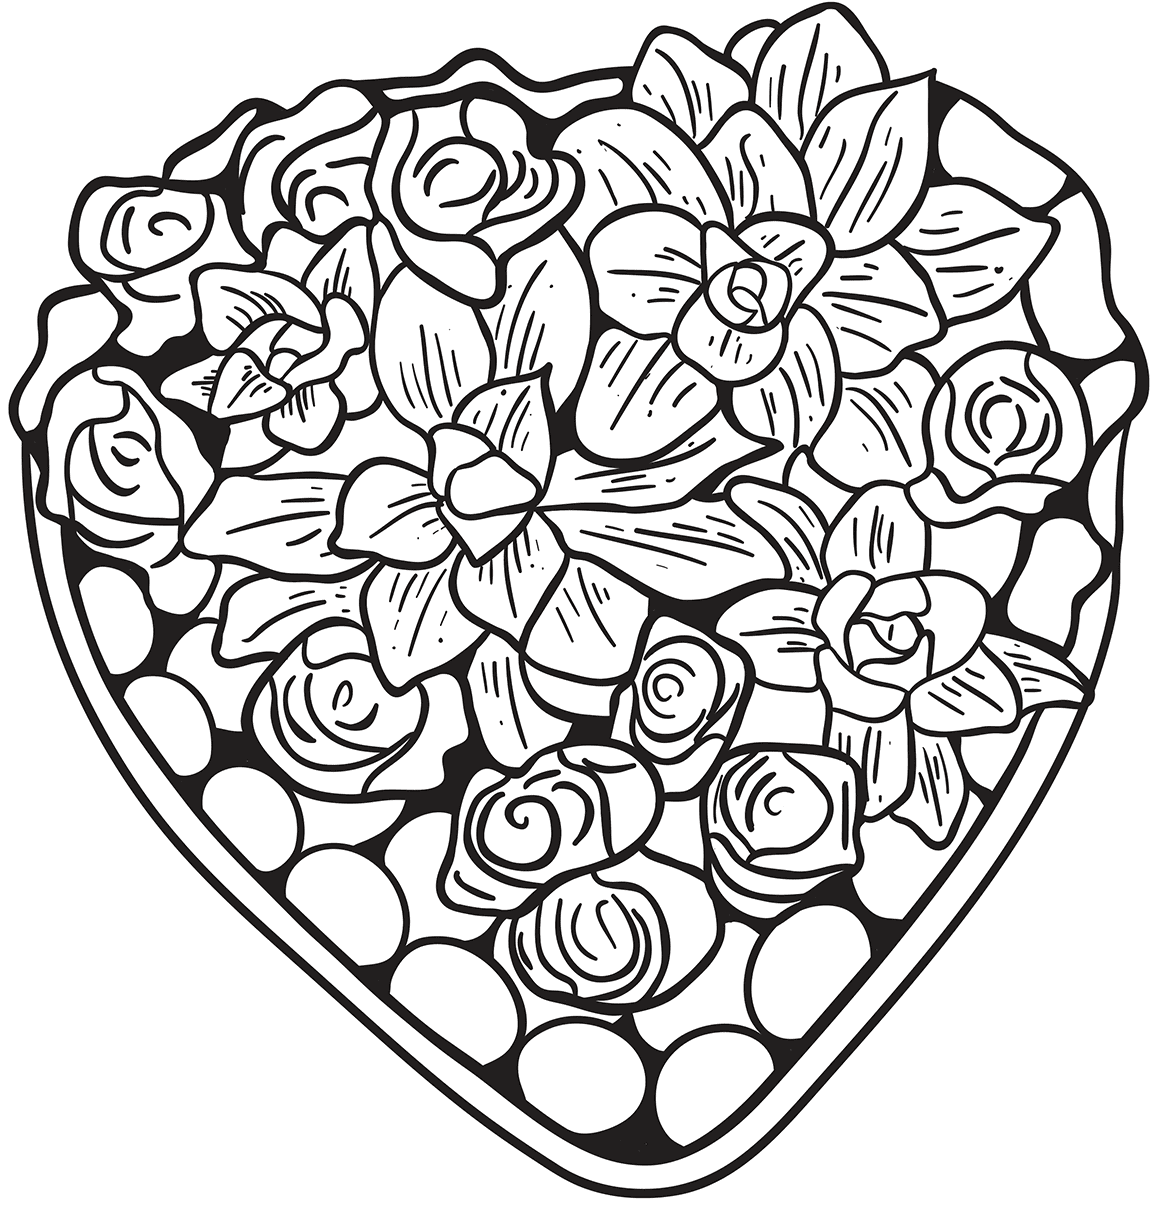 Heart Made Of Flowers Coloring Page